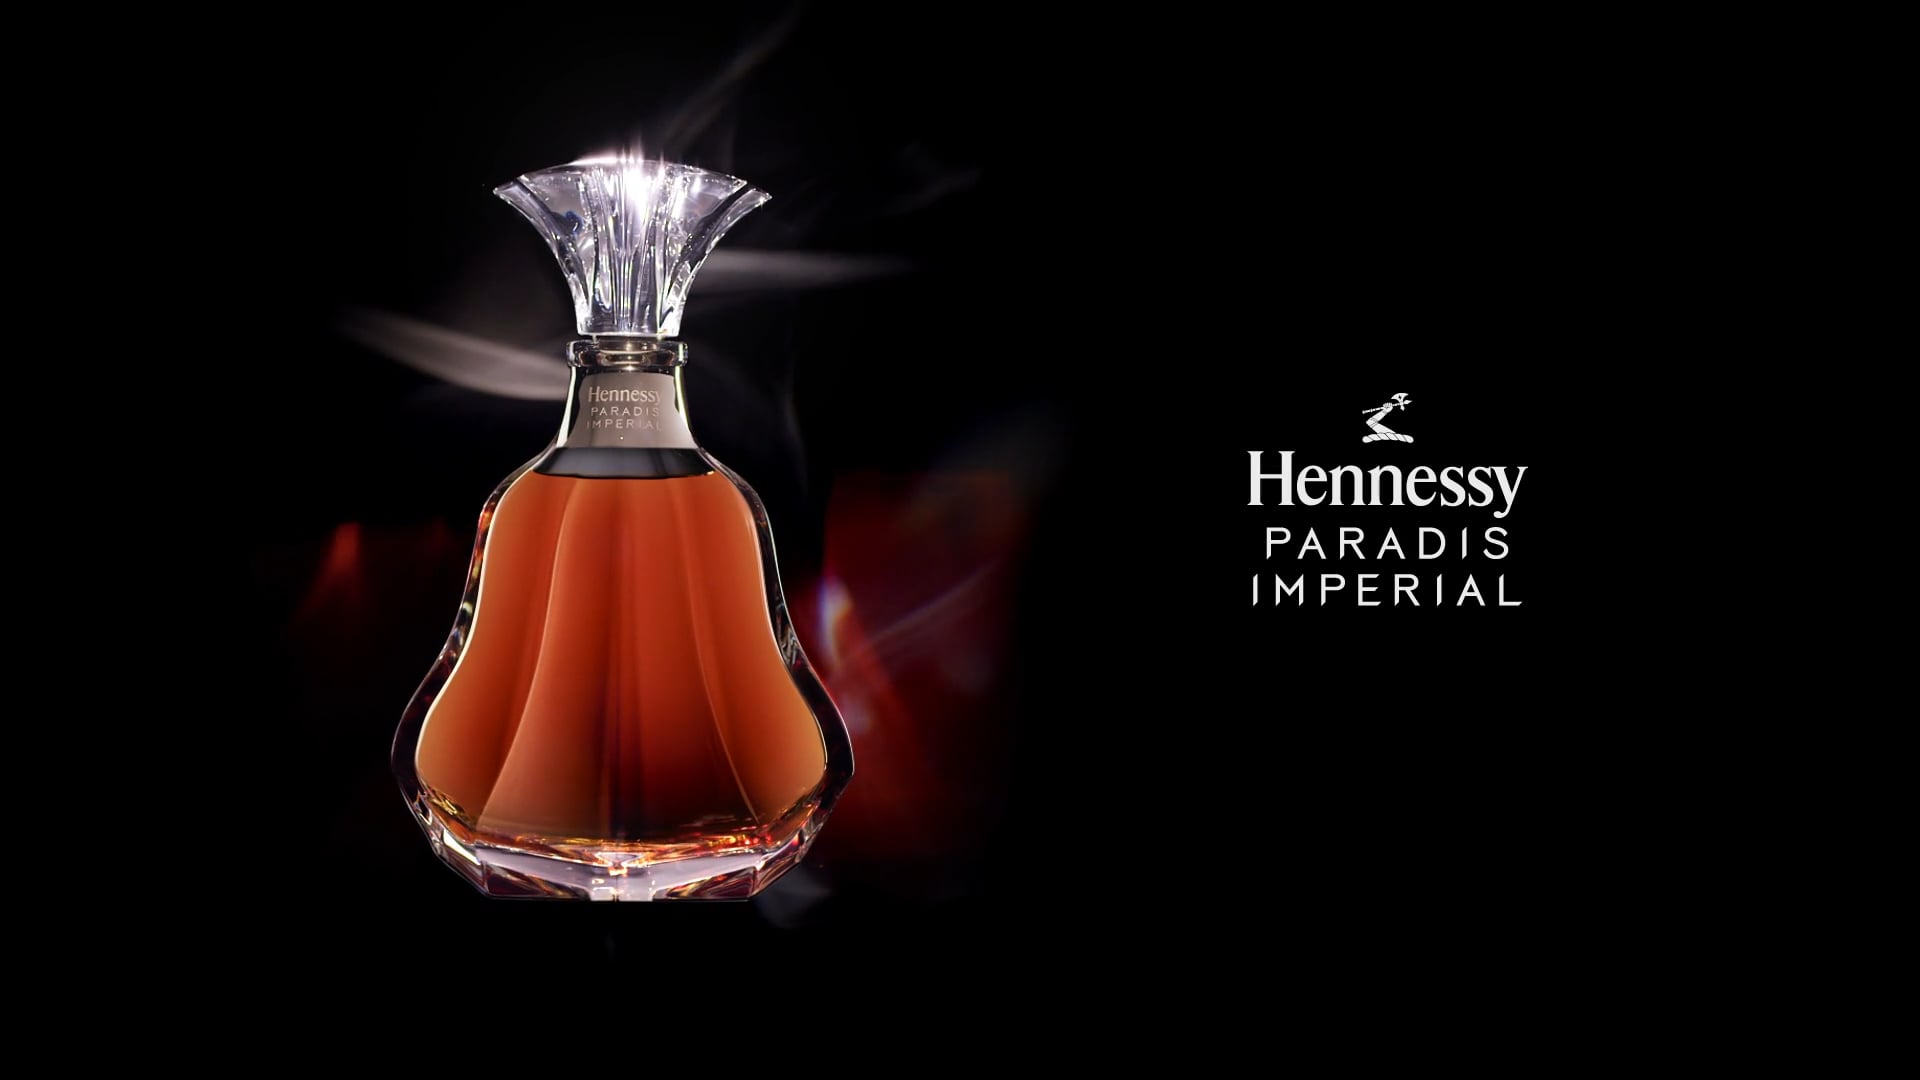 Hennessy Paradis imperial reveal